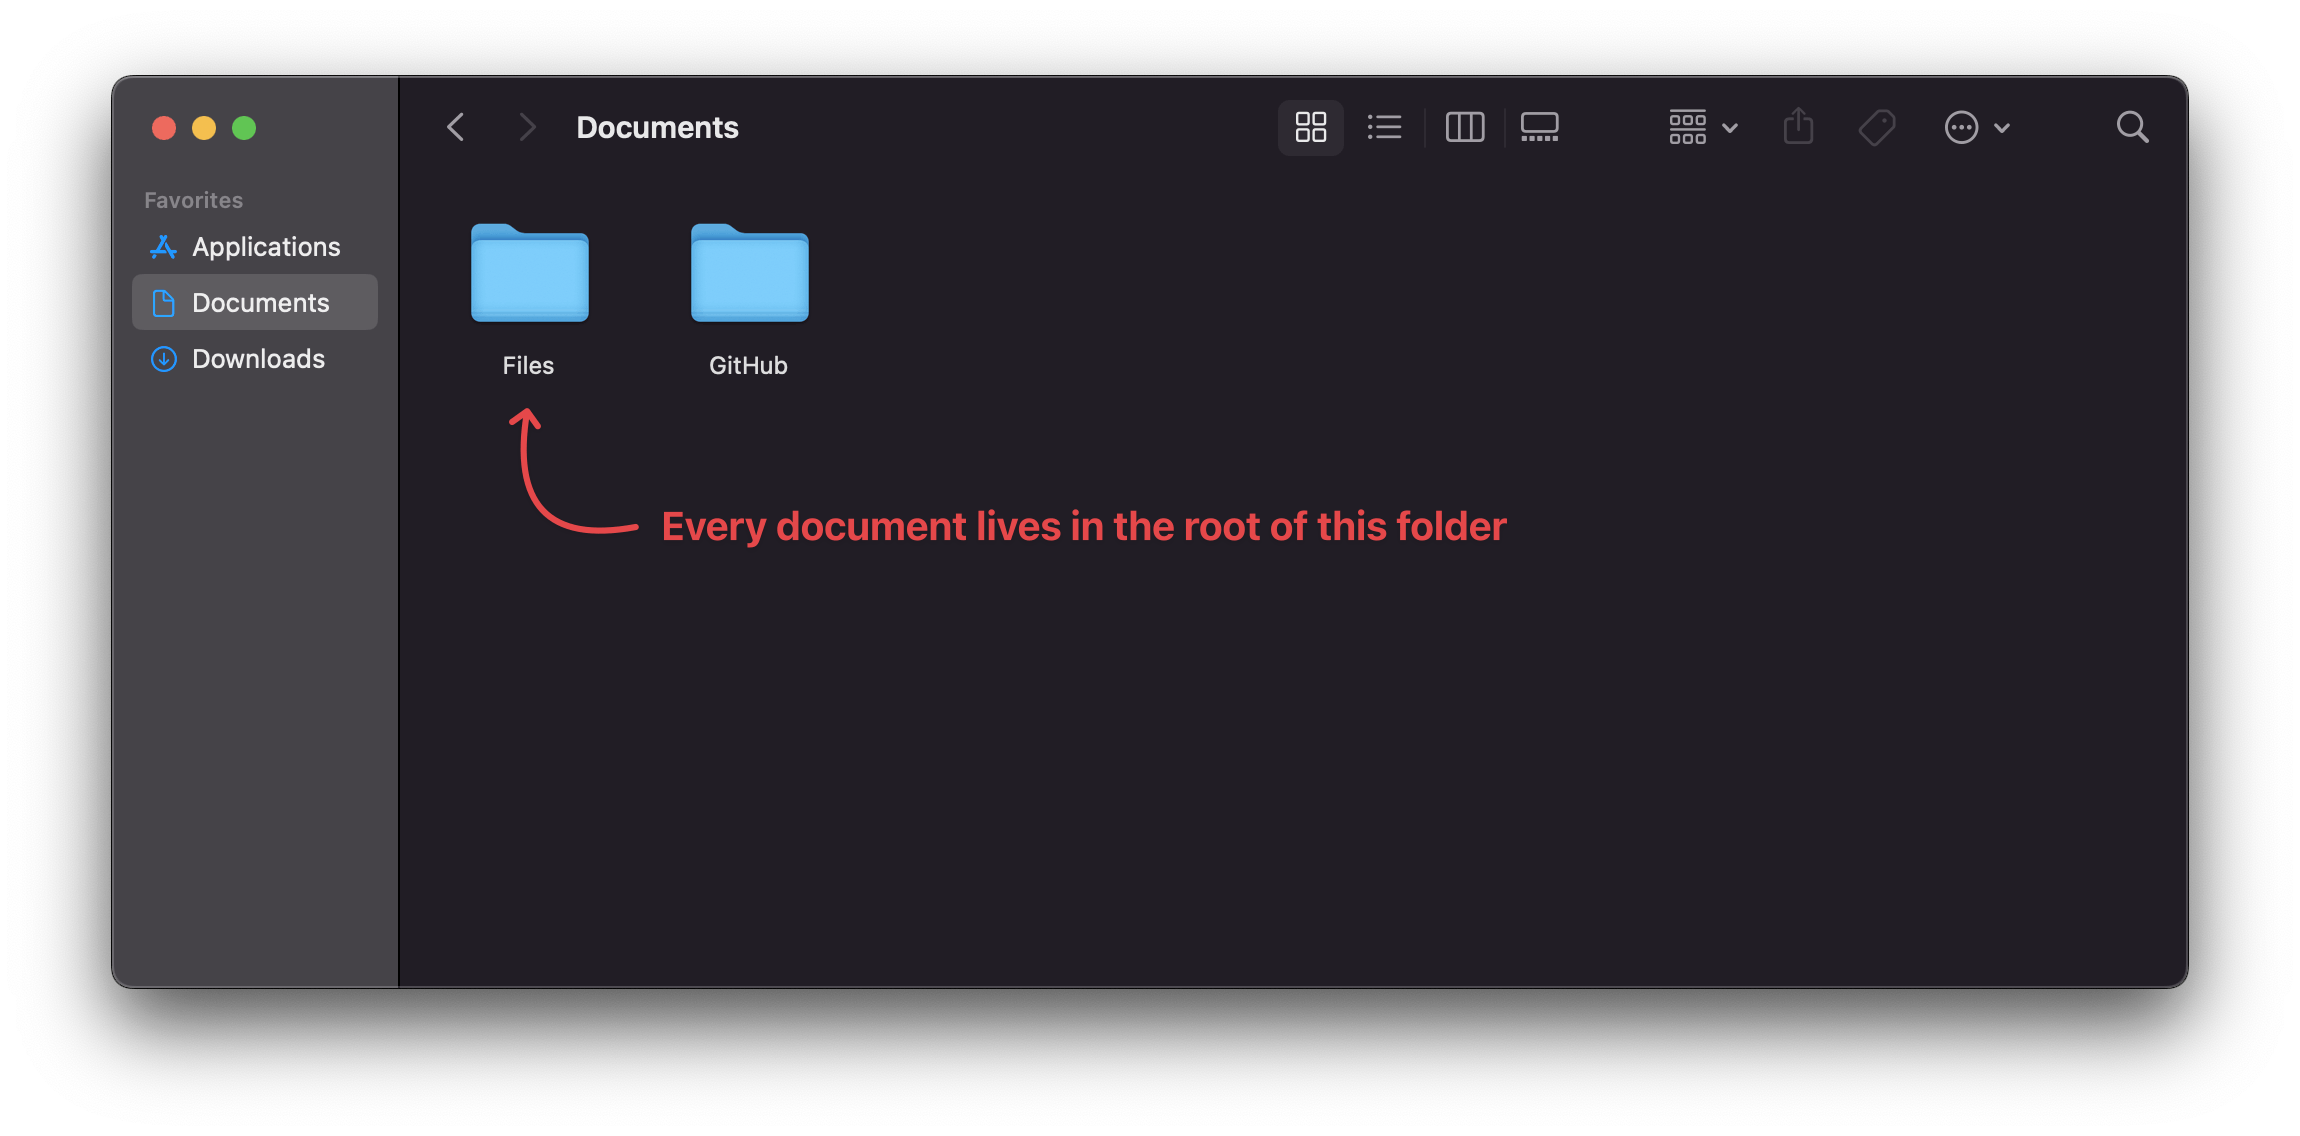 Screenshot of my documents folder, showing a single Files folder containing everything